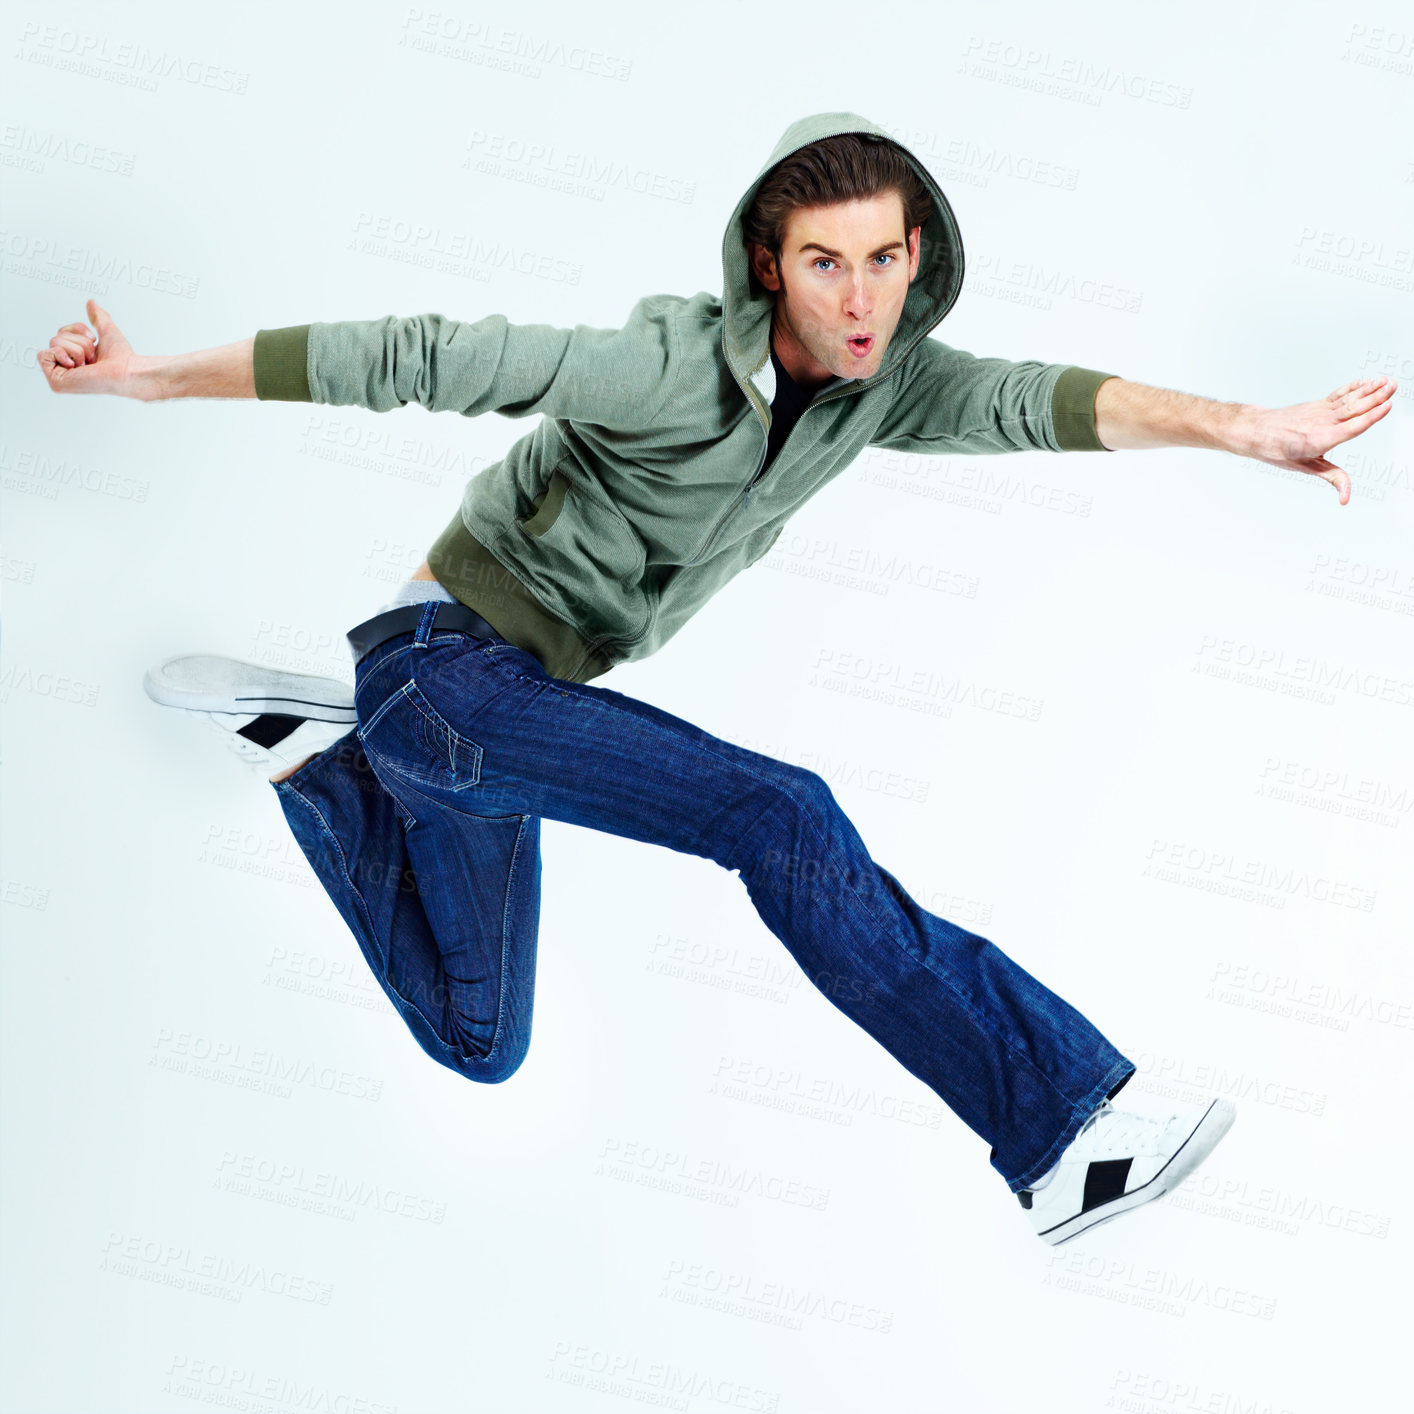 Buy stock photo Portrait of a young man posing while jumping in the air